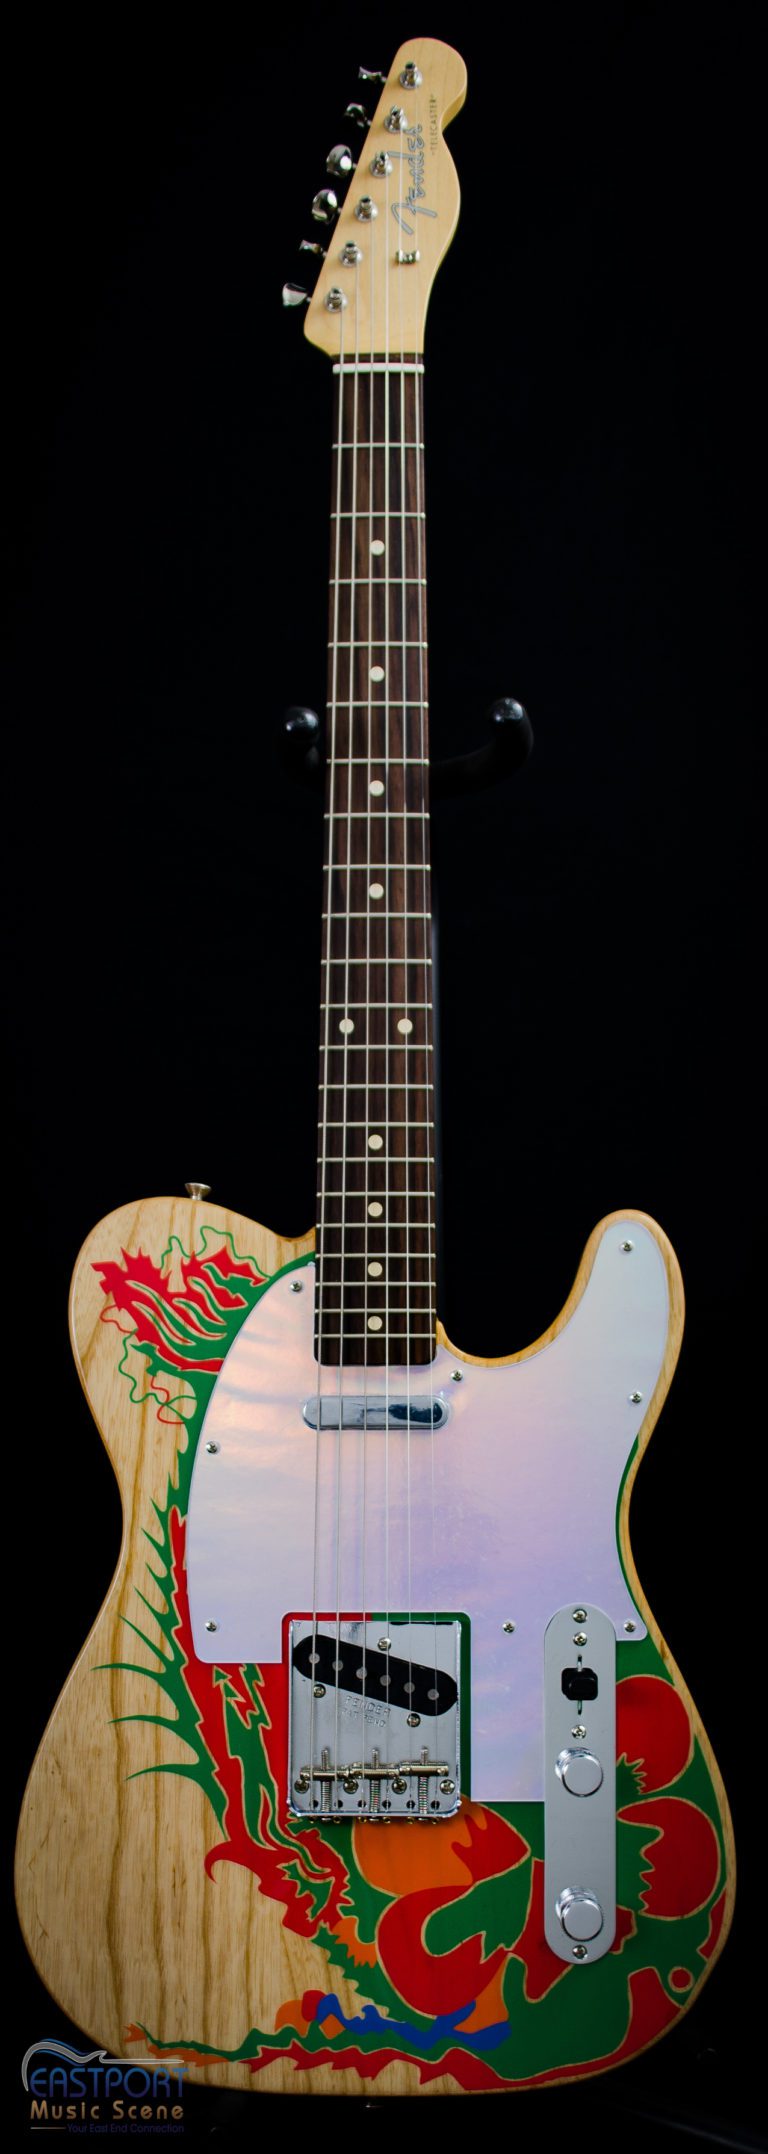 A guitar with a picture of flowers on it.